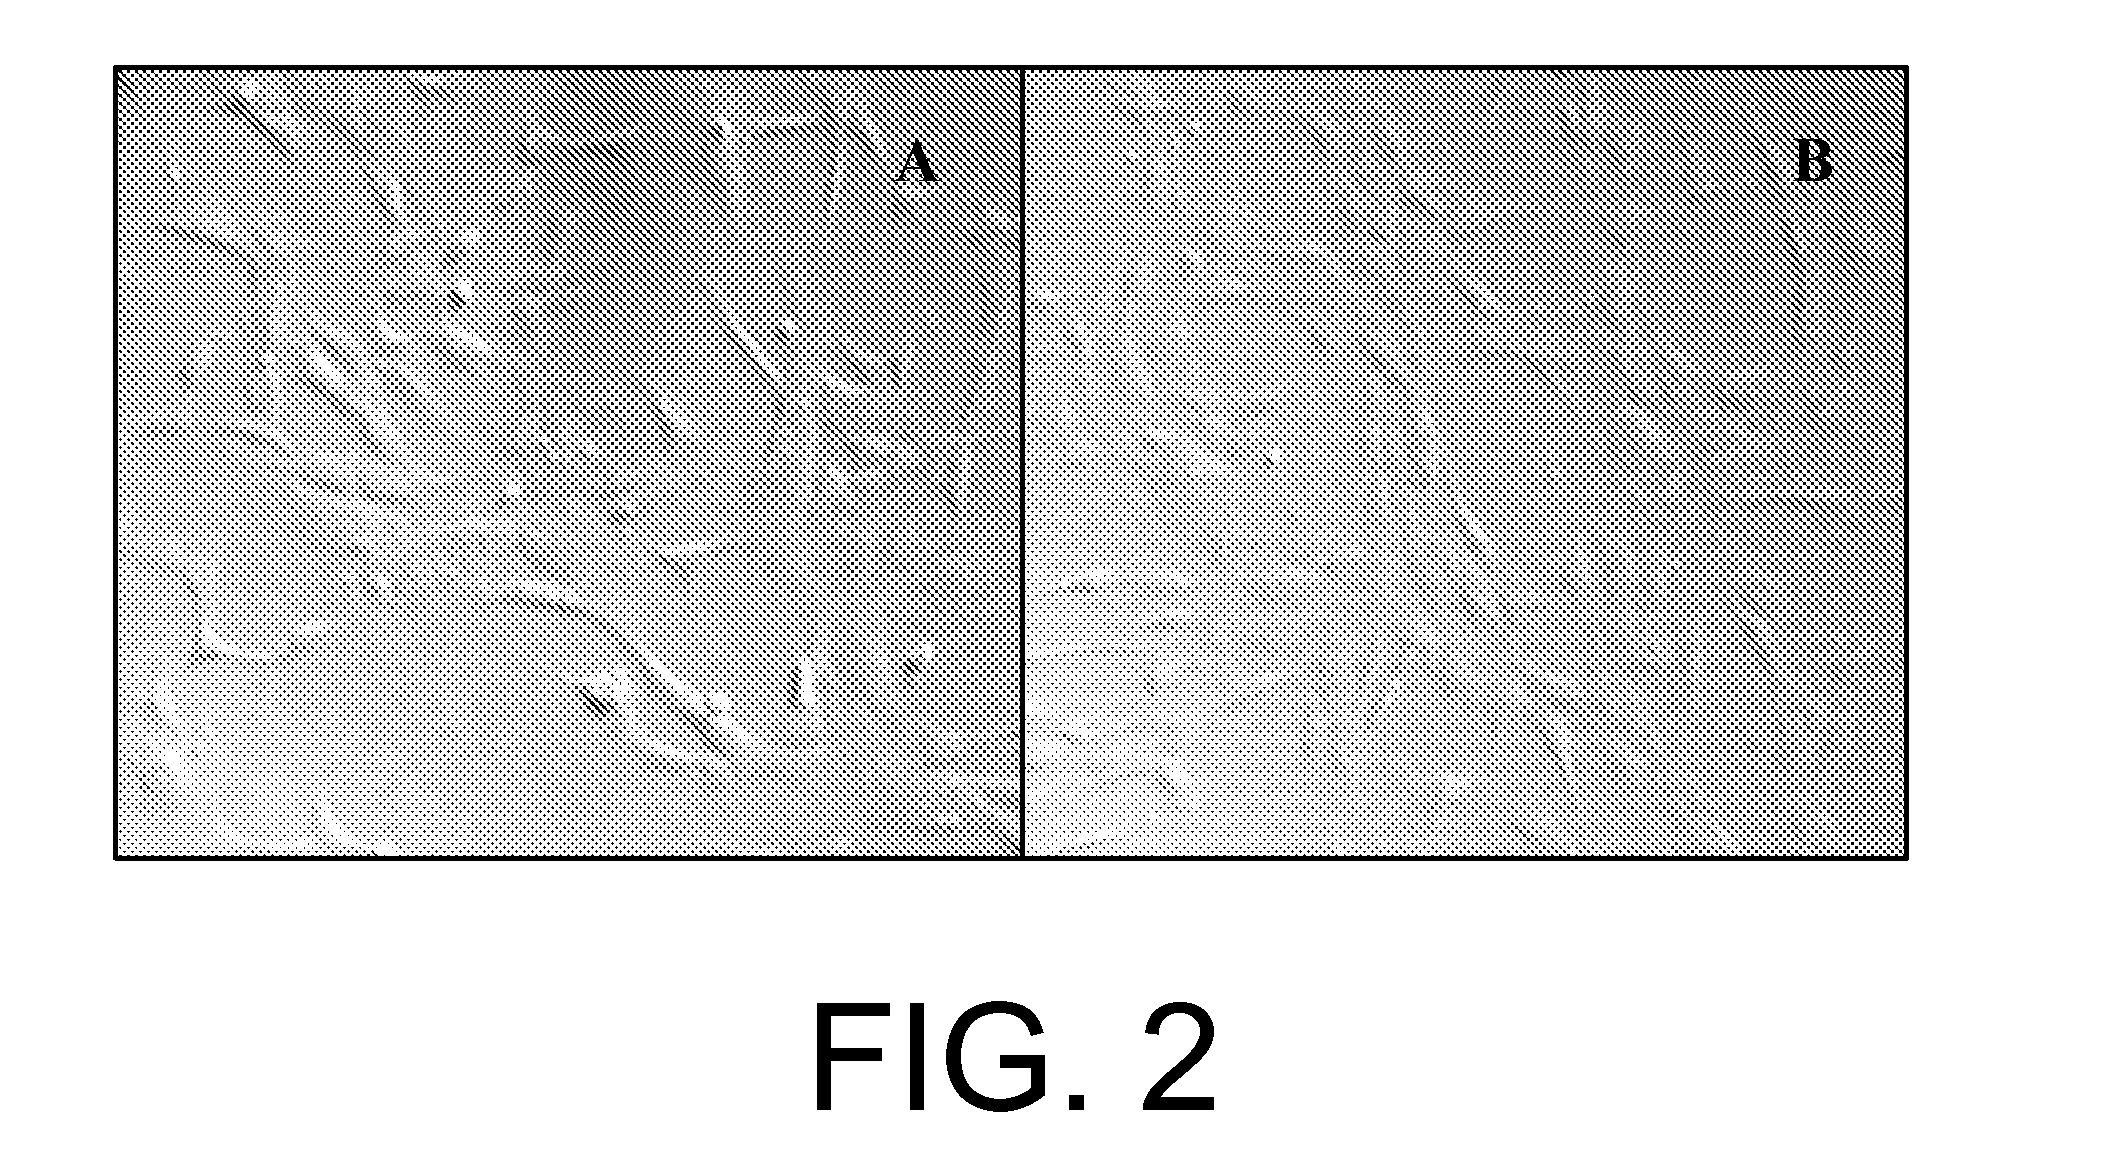 Method of isolation and use of cells derived from first trimester umbilical cord tissue